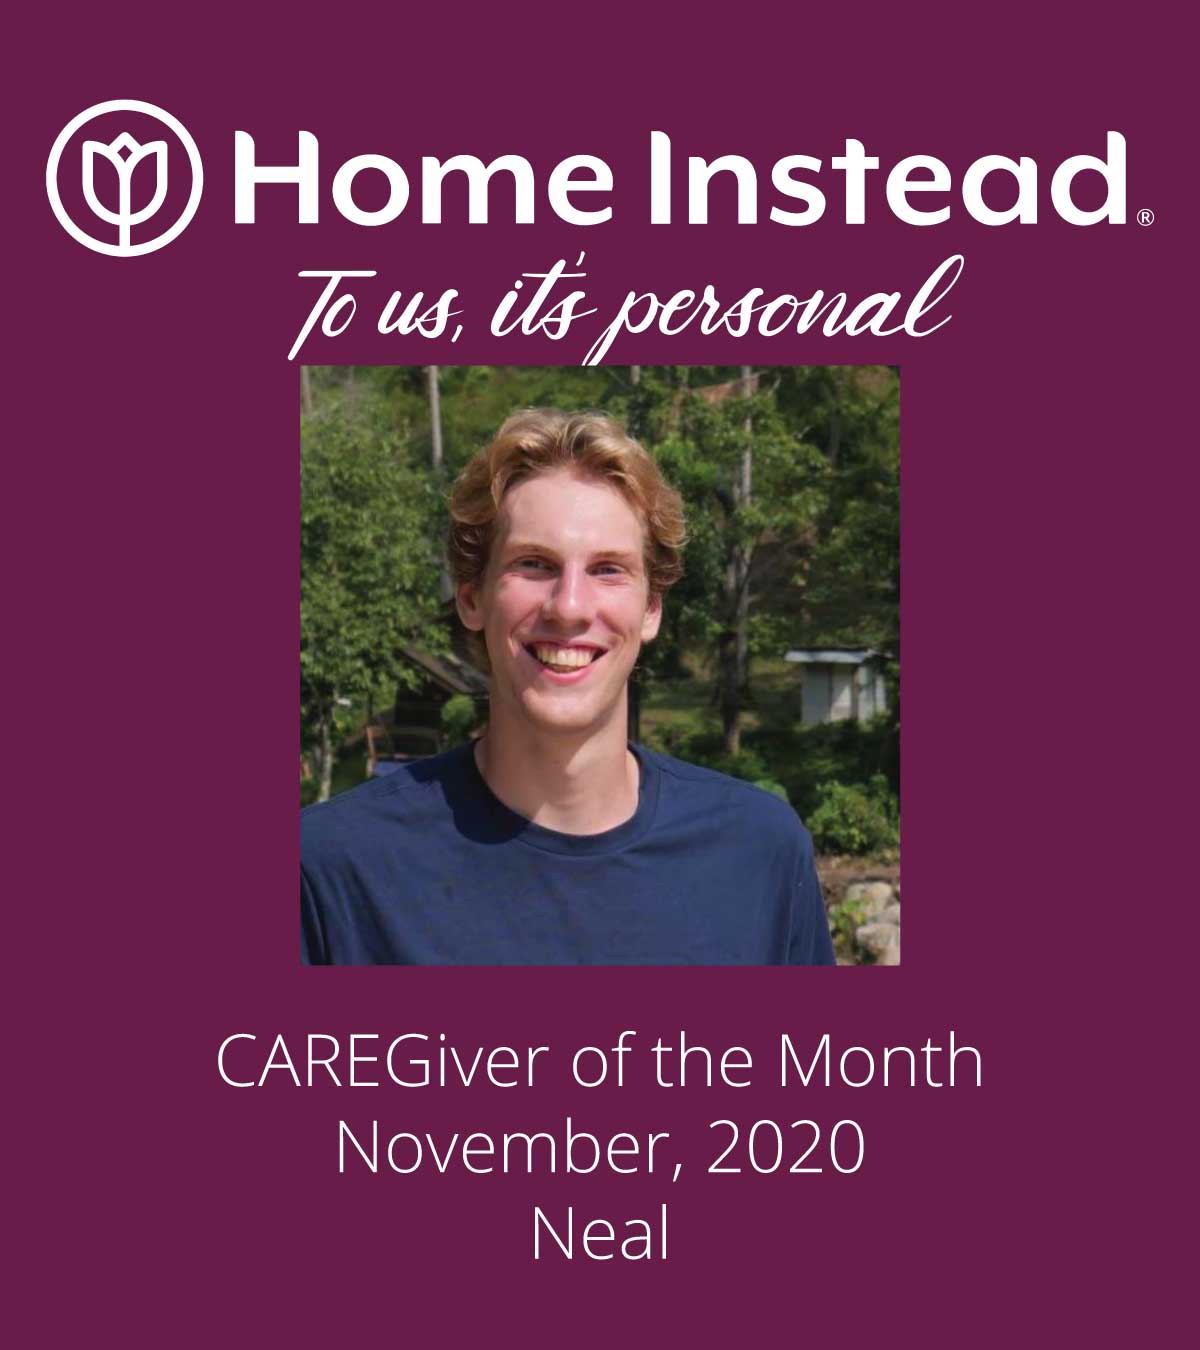 Home Instead Caregiver of the Month Neal